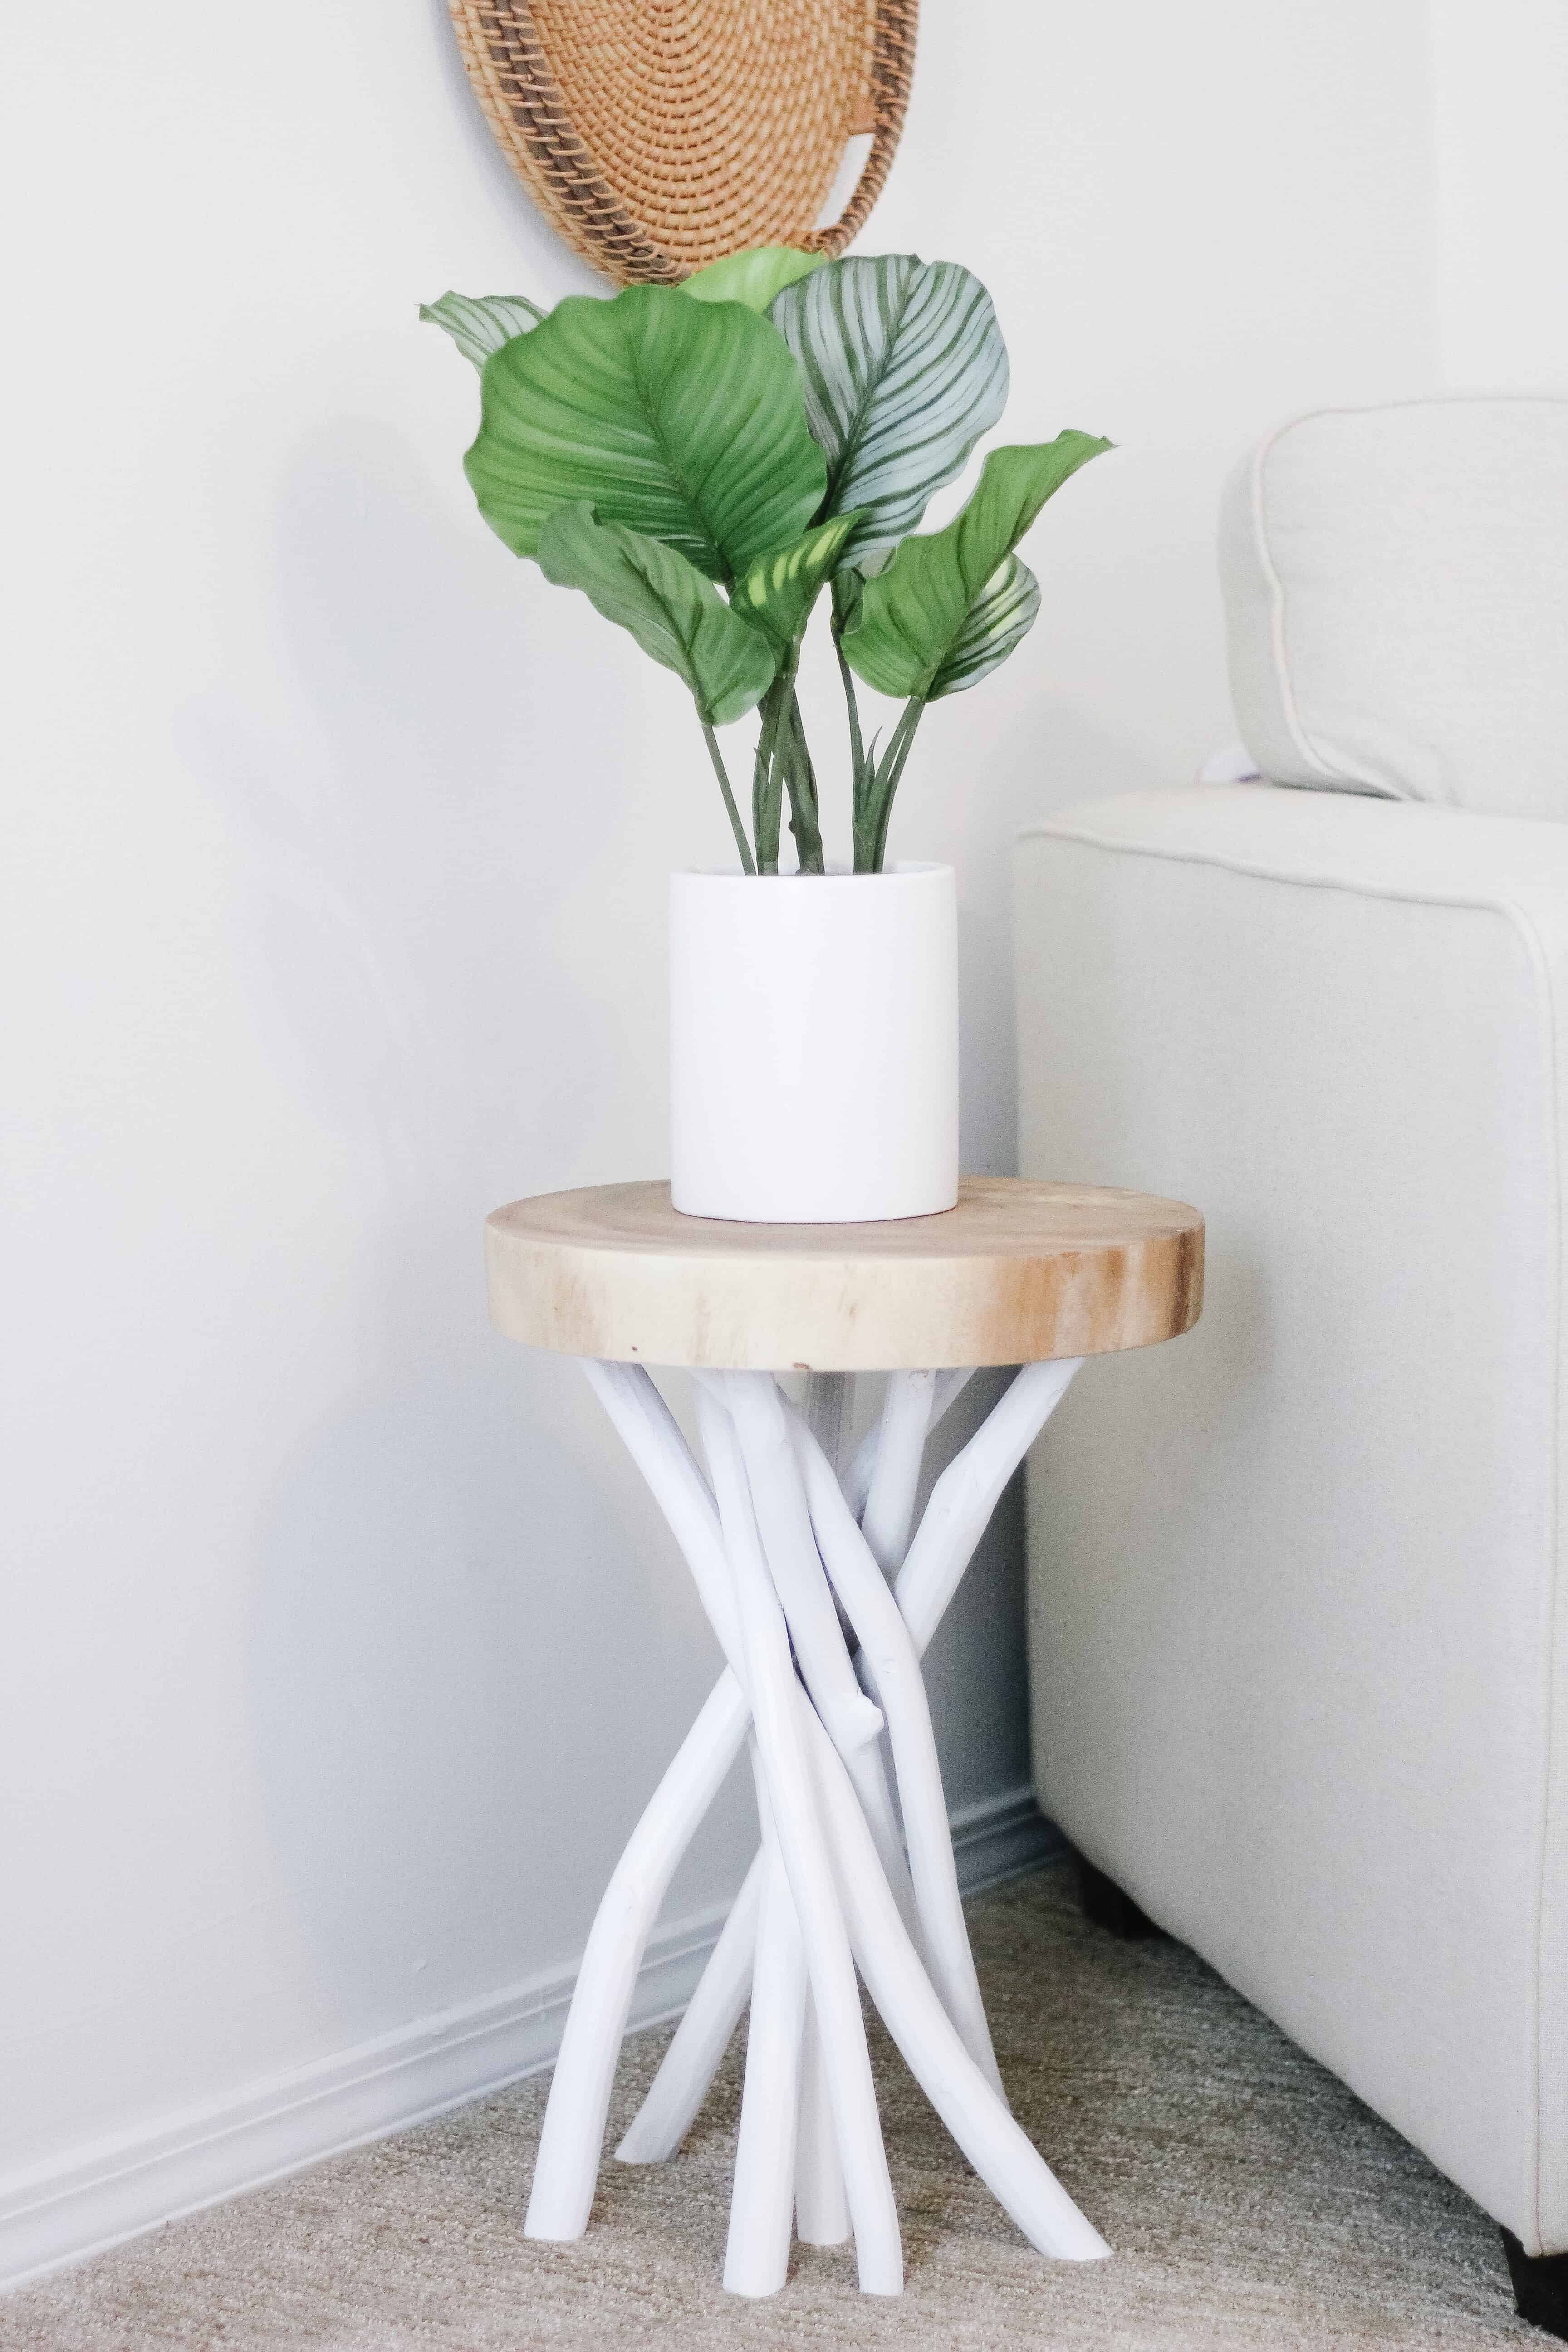 Wood side table with small plant on it